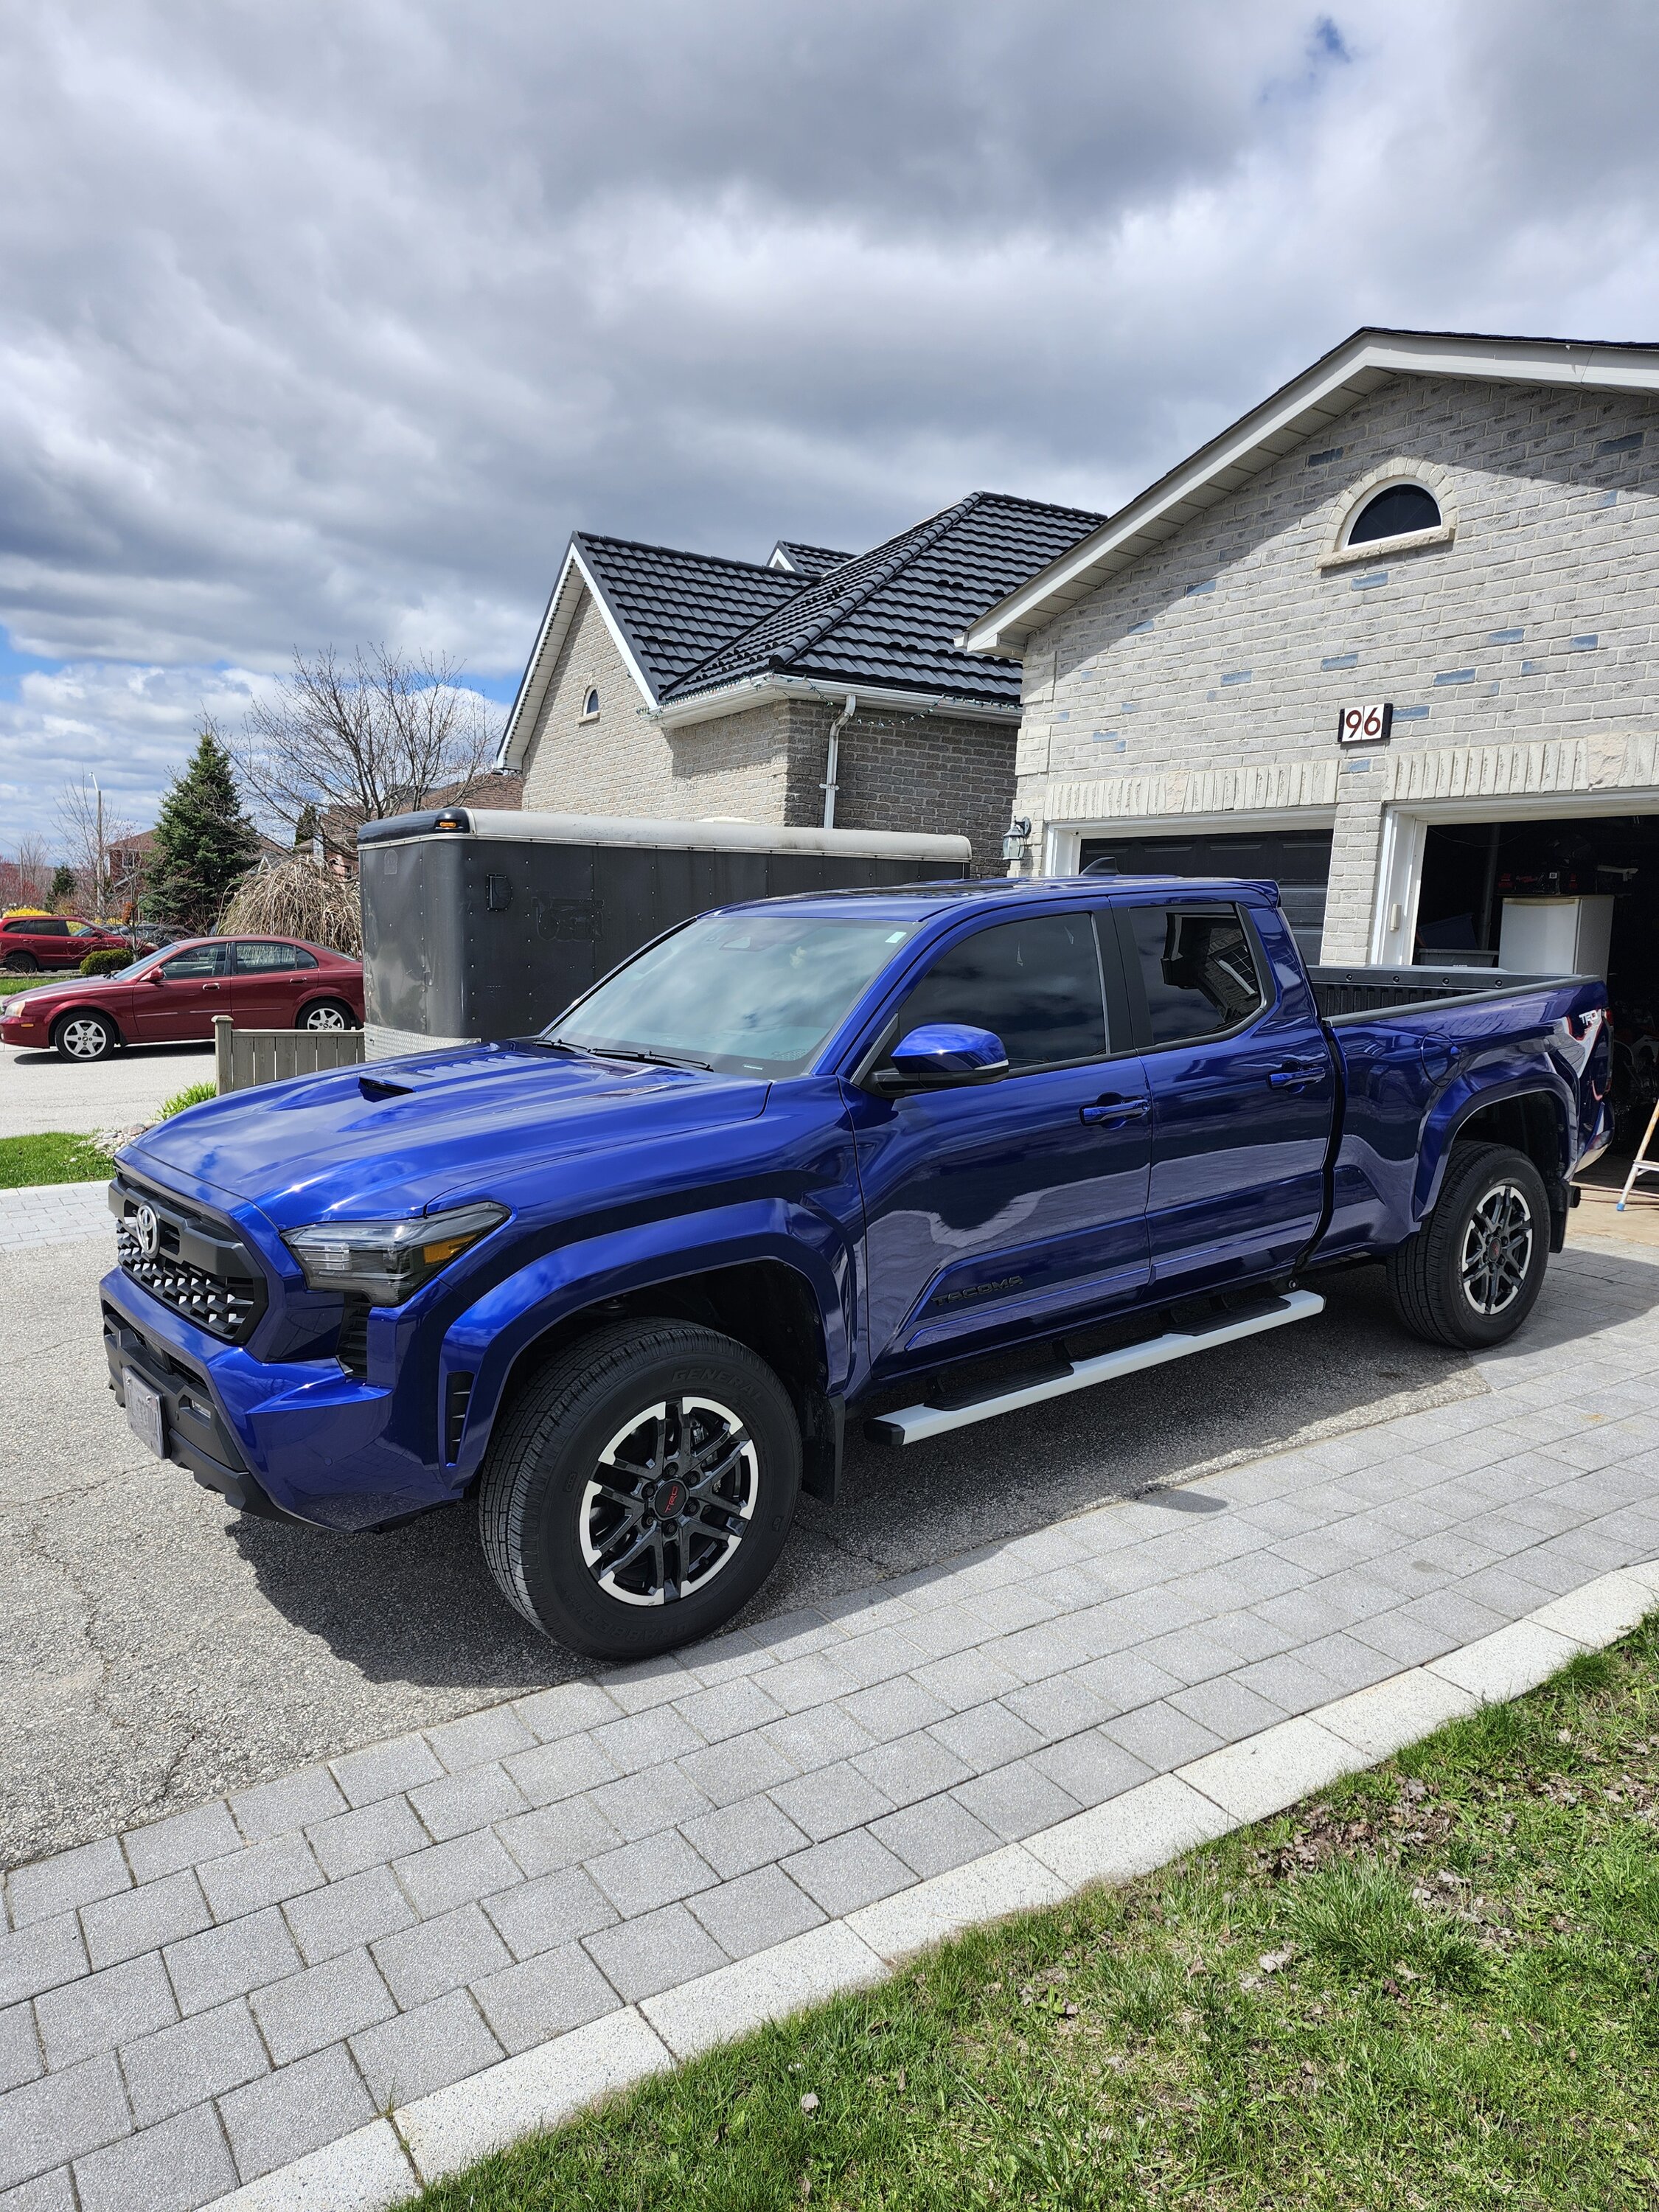 2024 Tacoma Couple pics after detailing + 2 coats Turtle wax pro graphene wax! Turned out 🔥 20240421_123621